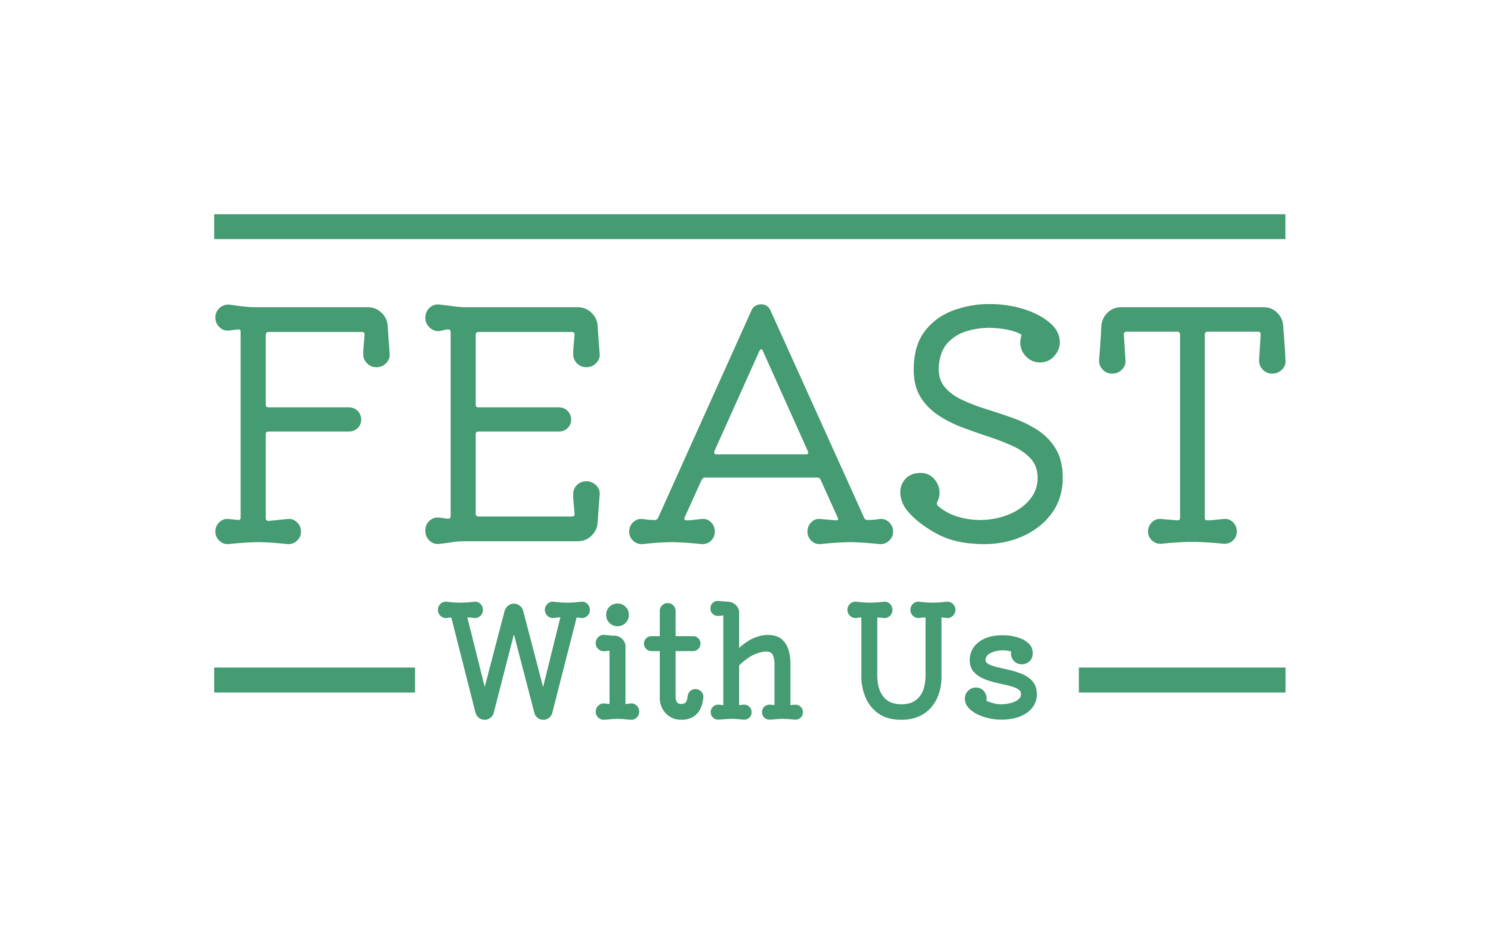 FEAST With Us